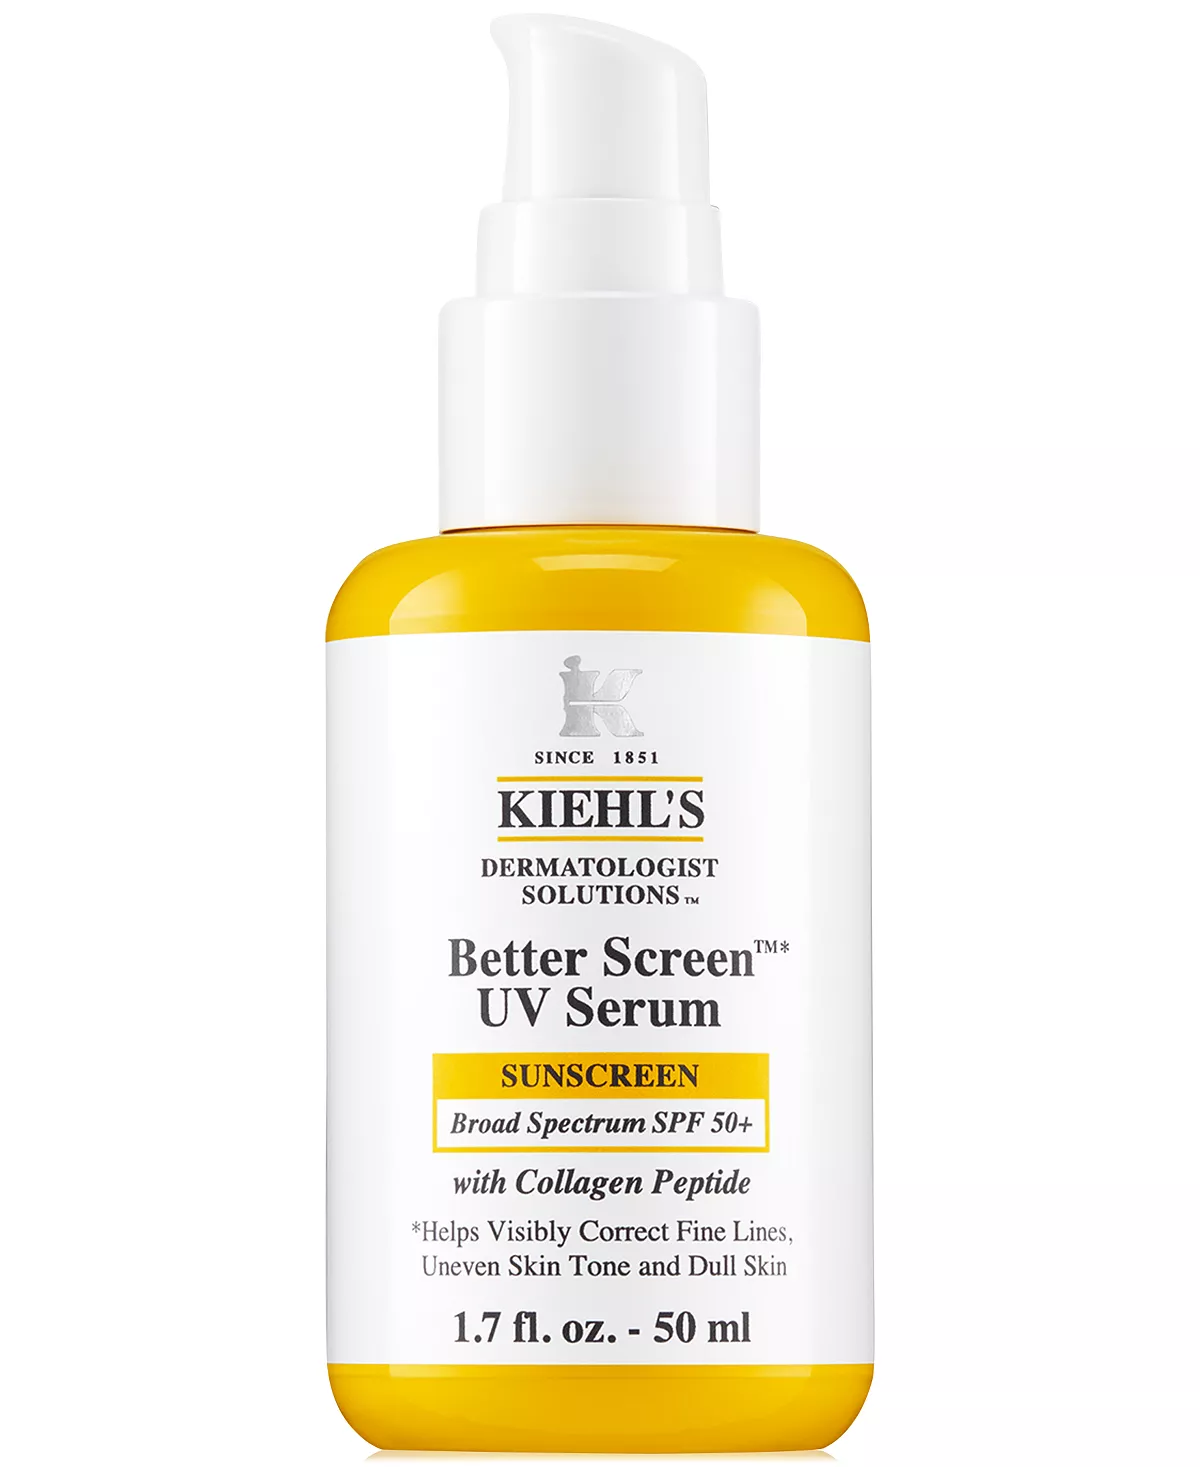 Kiehl’s Better Screen UV Serum SPF 50+ With Collagen Peptide Discounts and Cashback